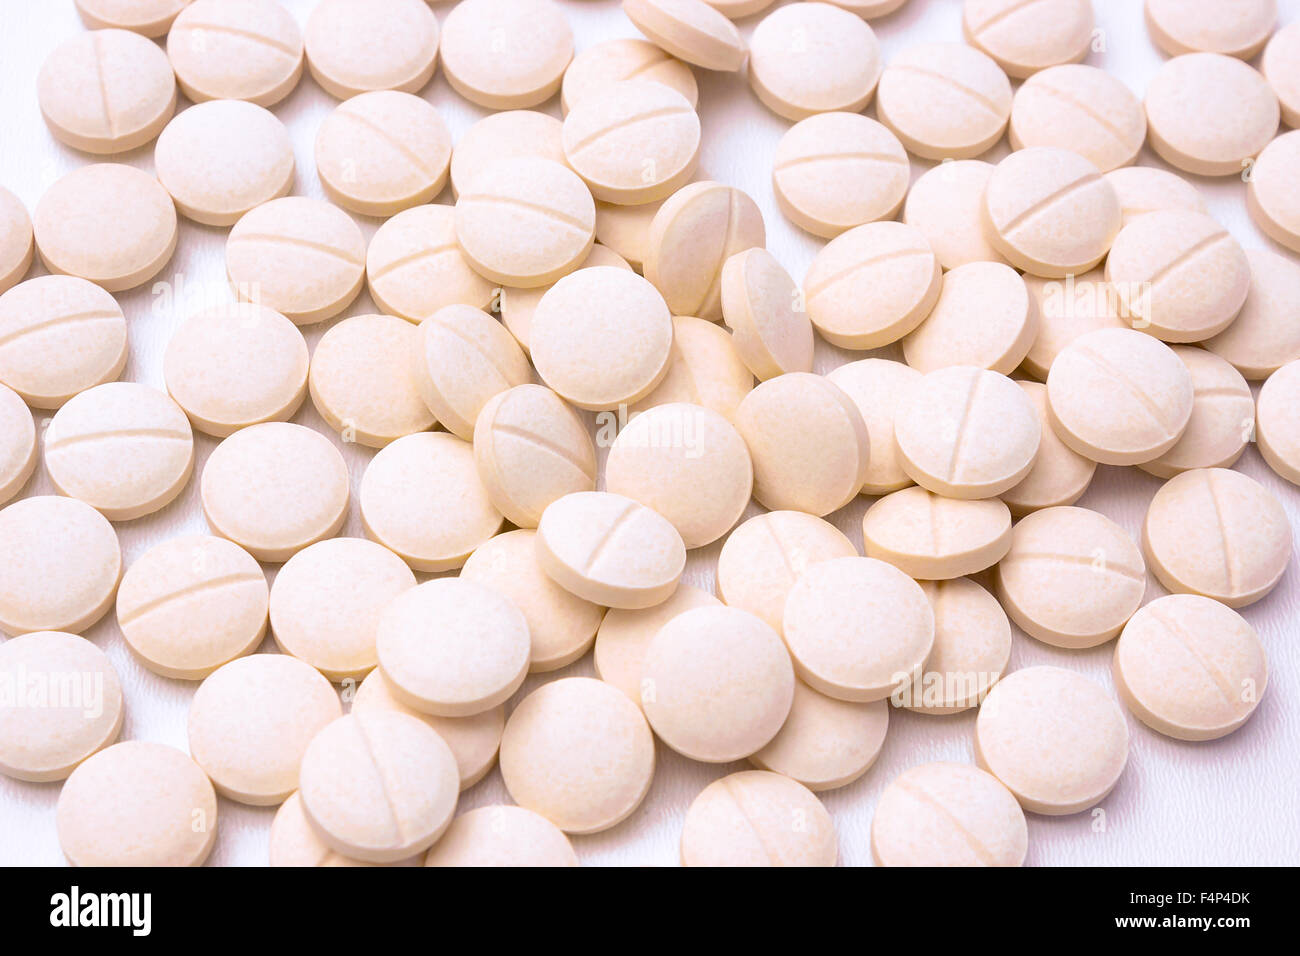 A Pile of Pills Stock Photo